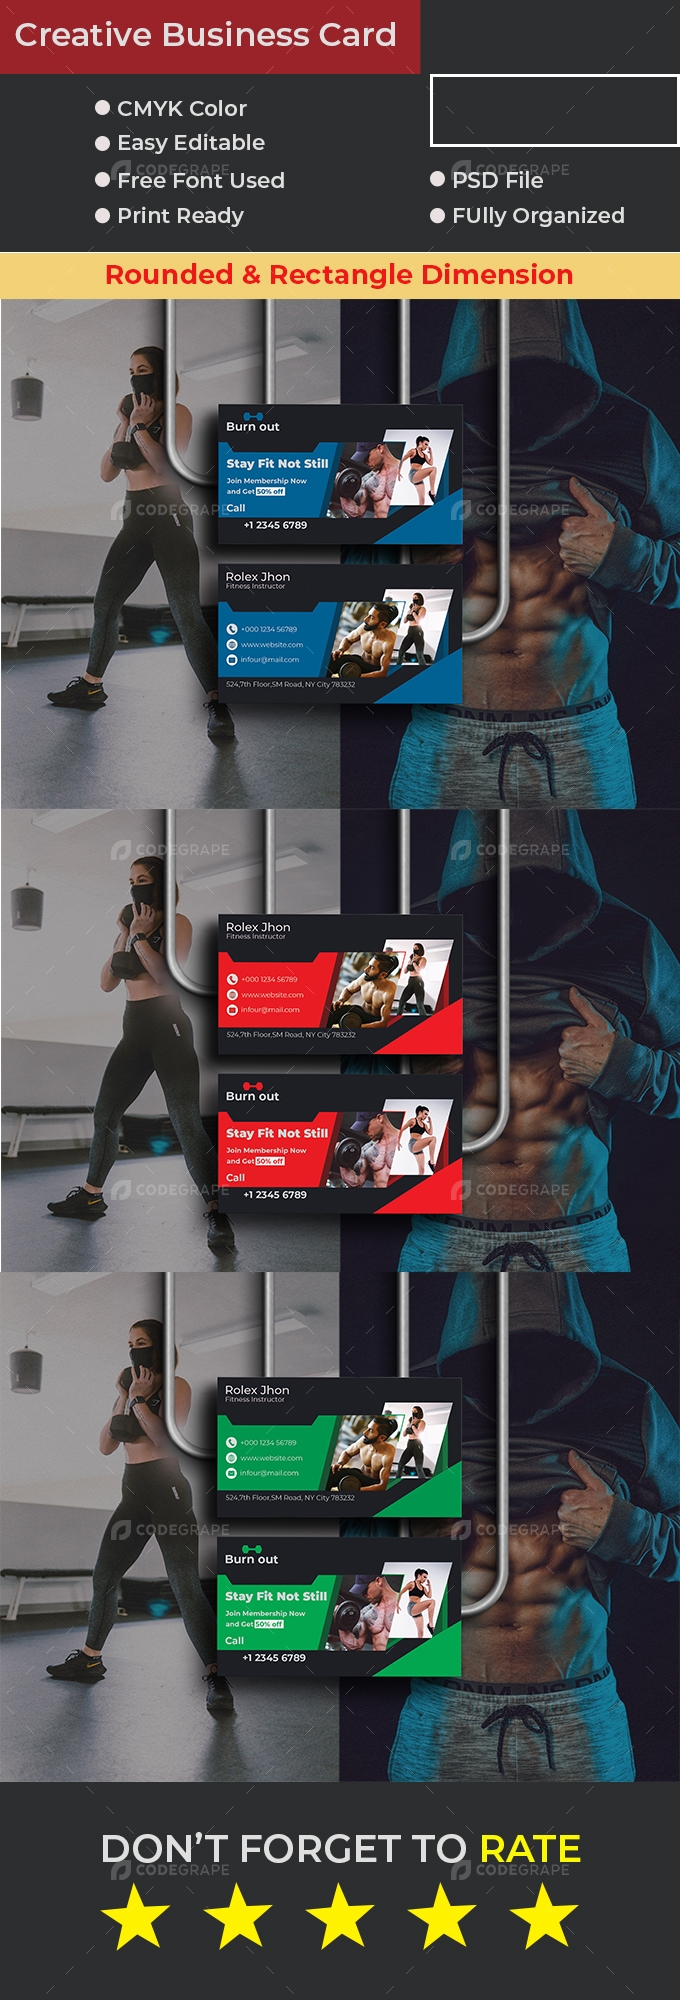 Fitness Trainer Business Card